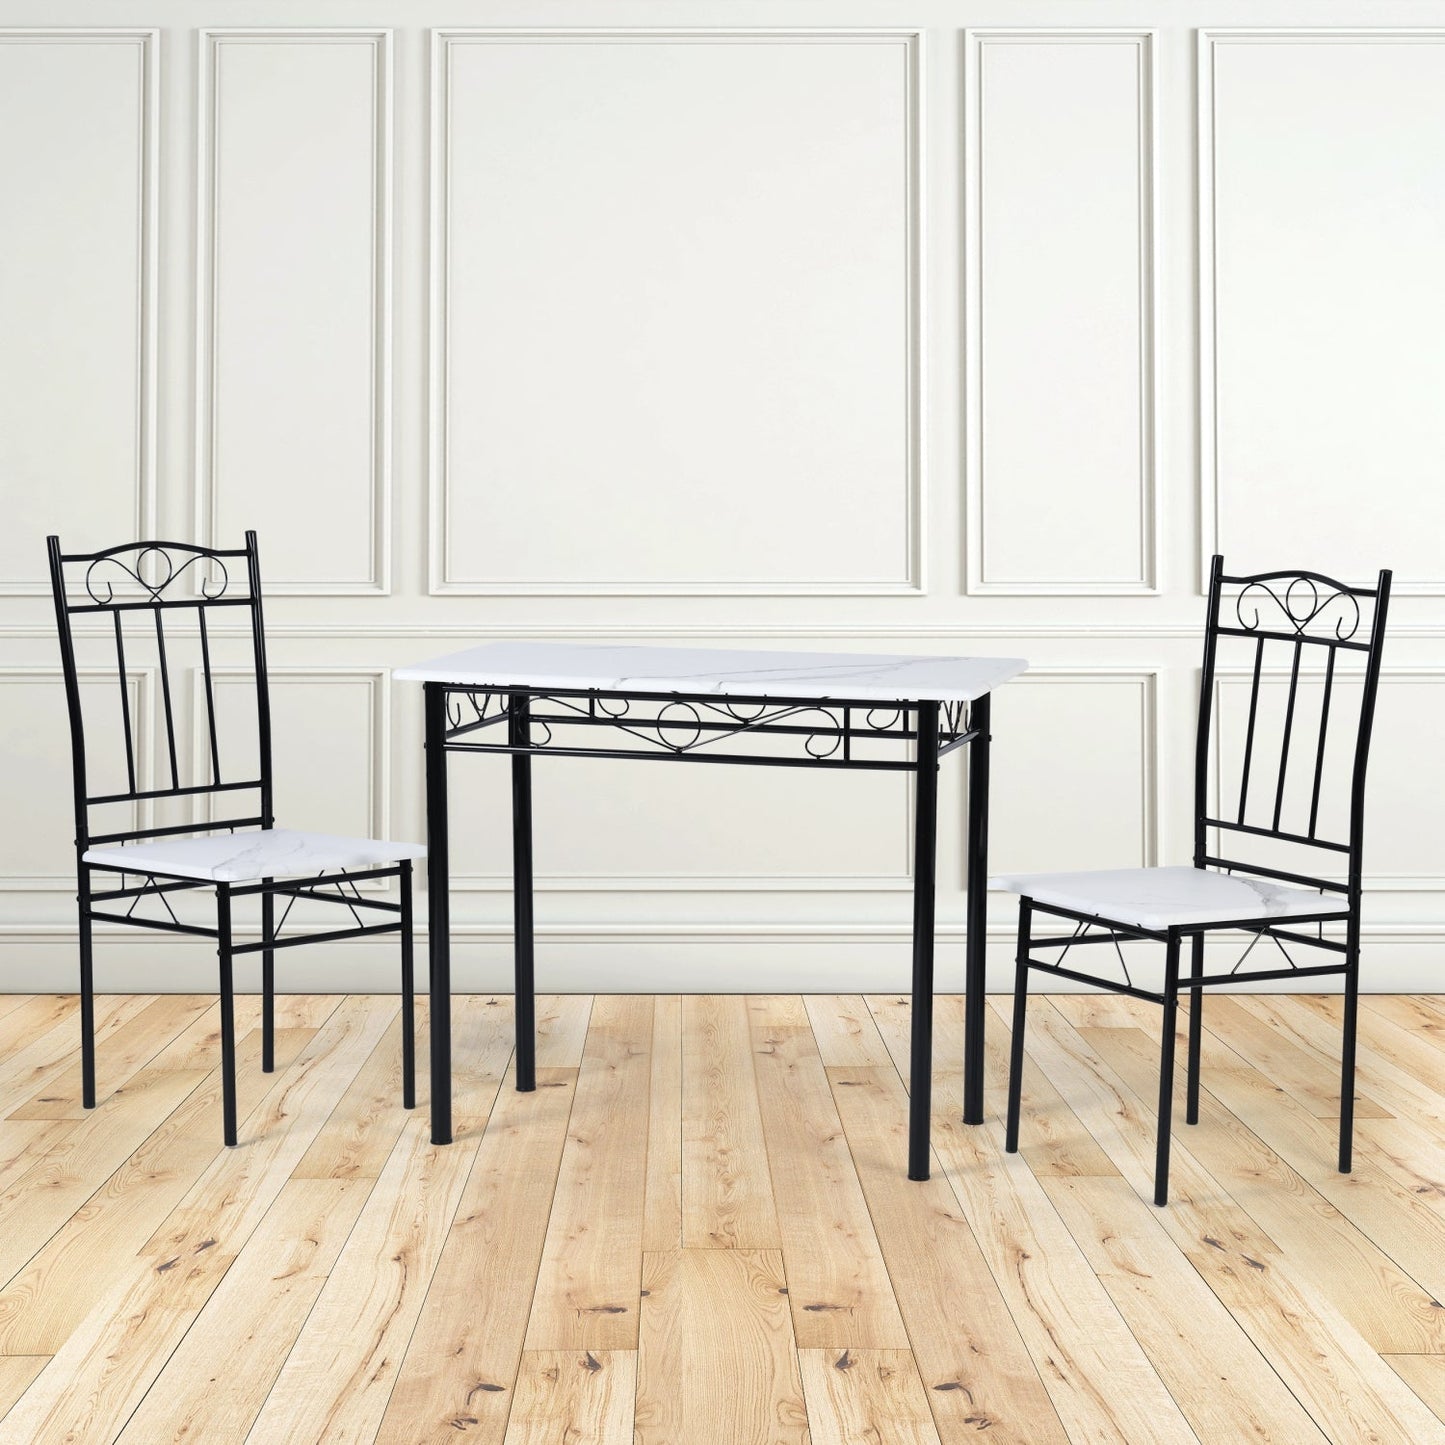 NORSEMAN Marbling Dining Table with 2 Chairs Set - 90*48*75cm - White/Black